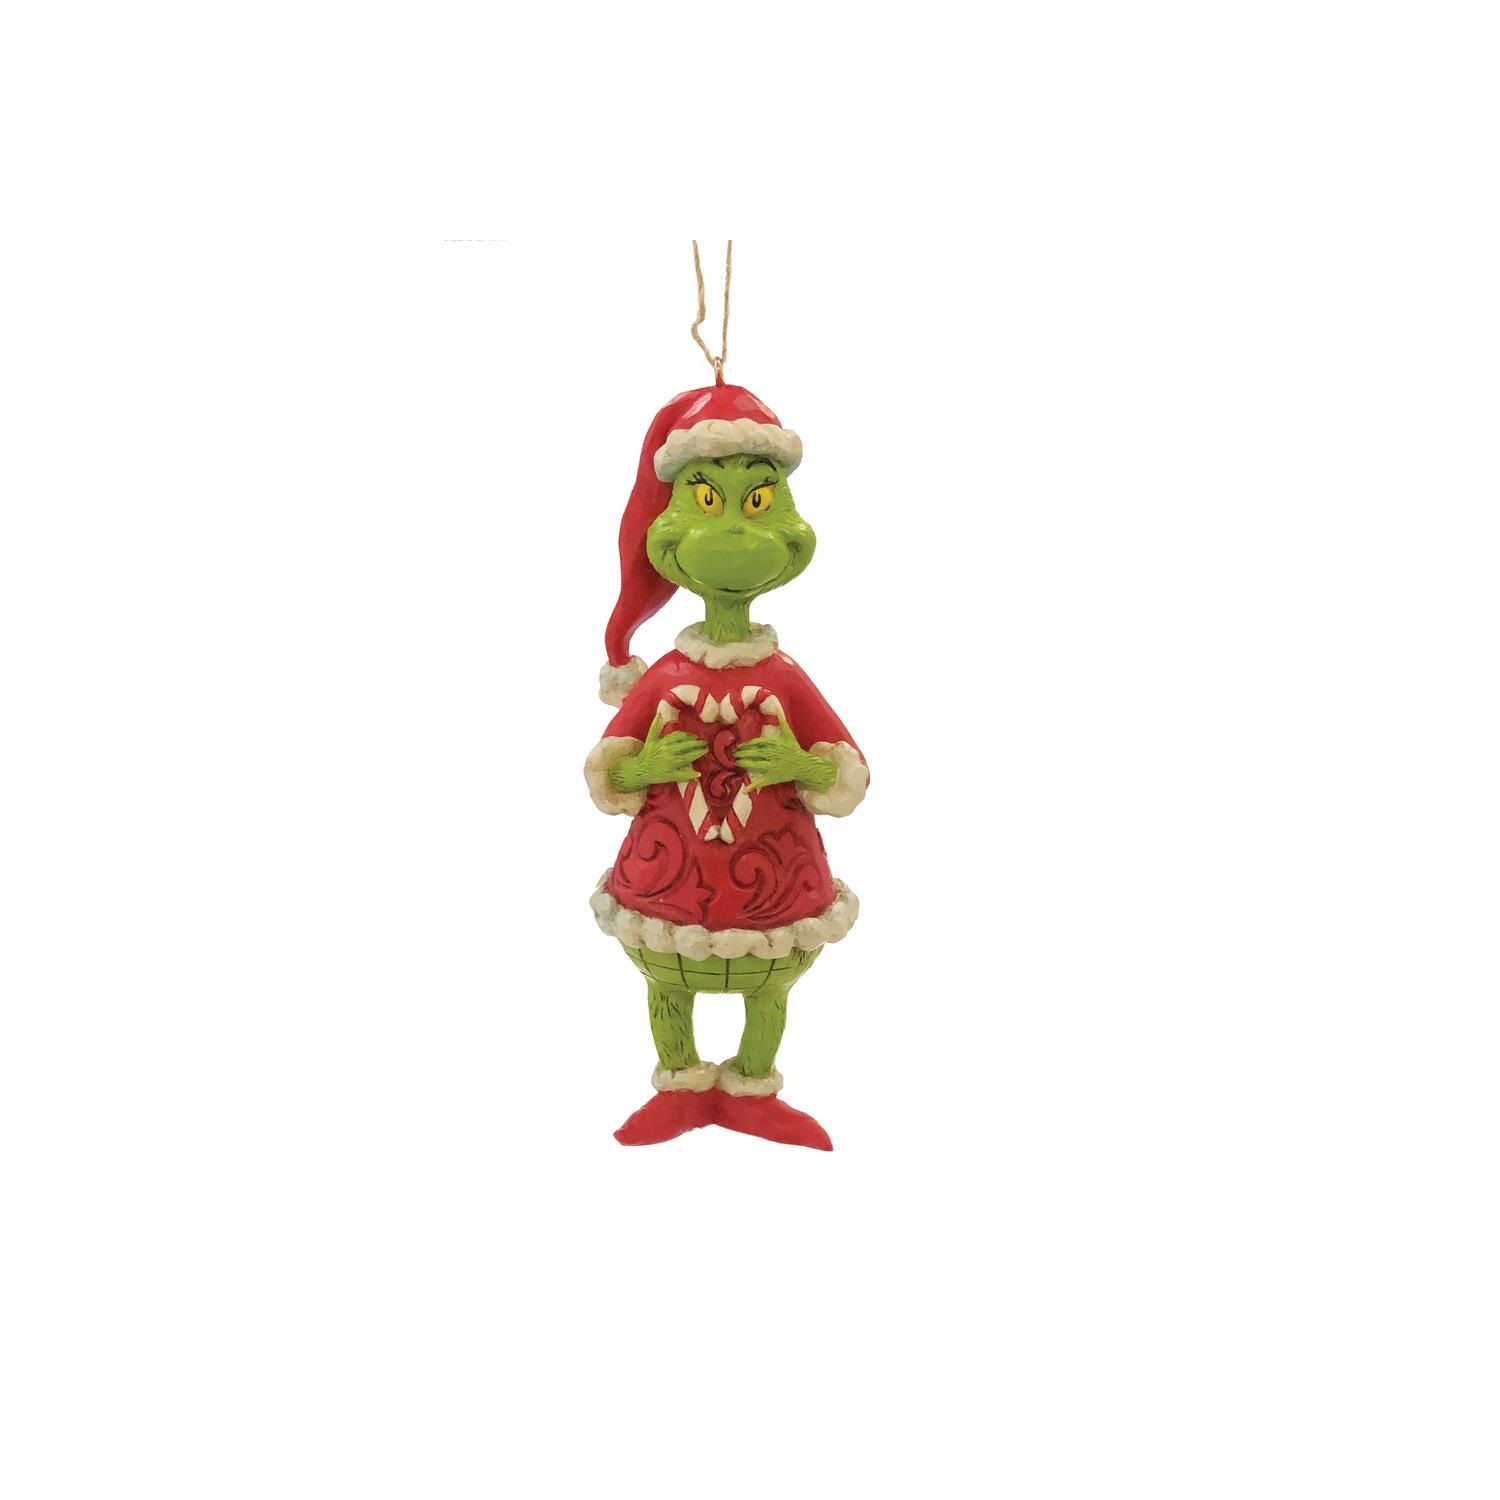 Dept 56 Enesco Dr. Seuss The Grinch Holding Candy Cane Ornament